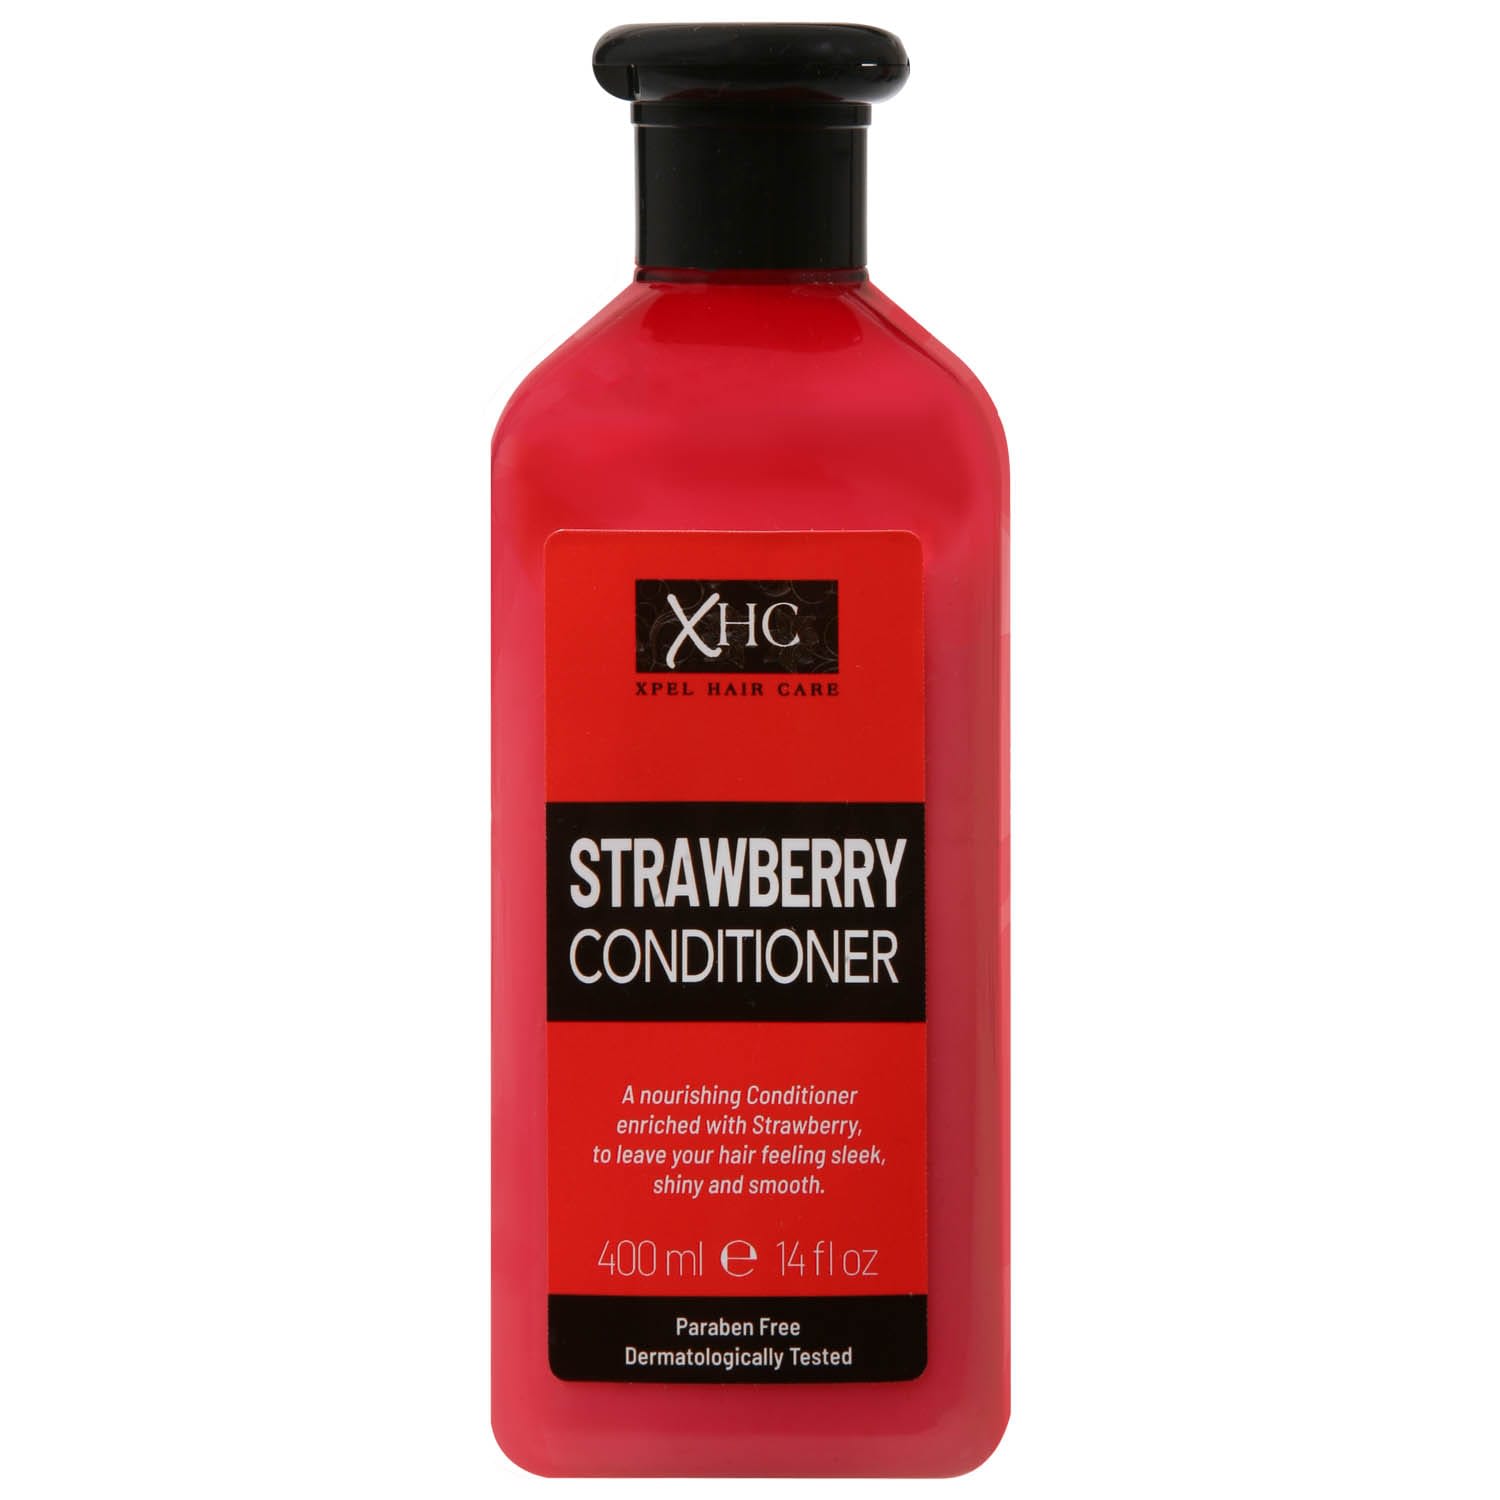 A Nourishing Conditioner Enriched with Strawberry to Leave Your Hair Feeling Sleek, Shiny and Smooth. - BCURVED